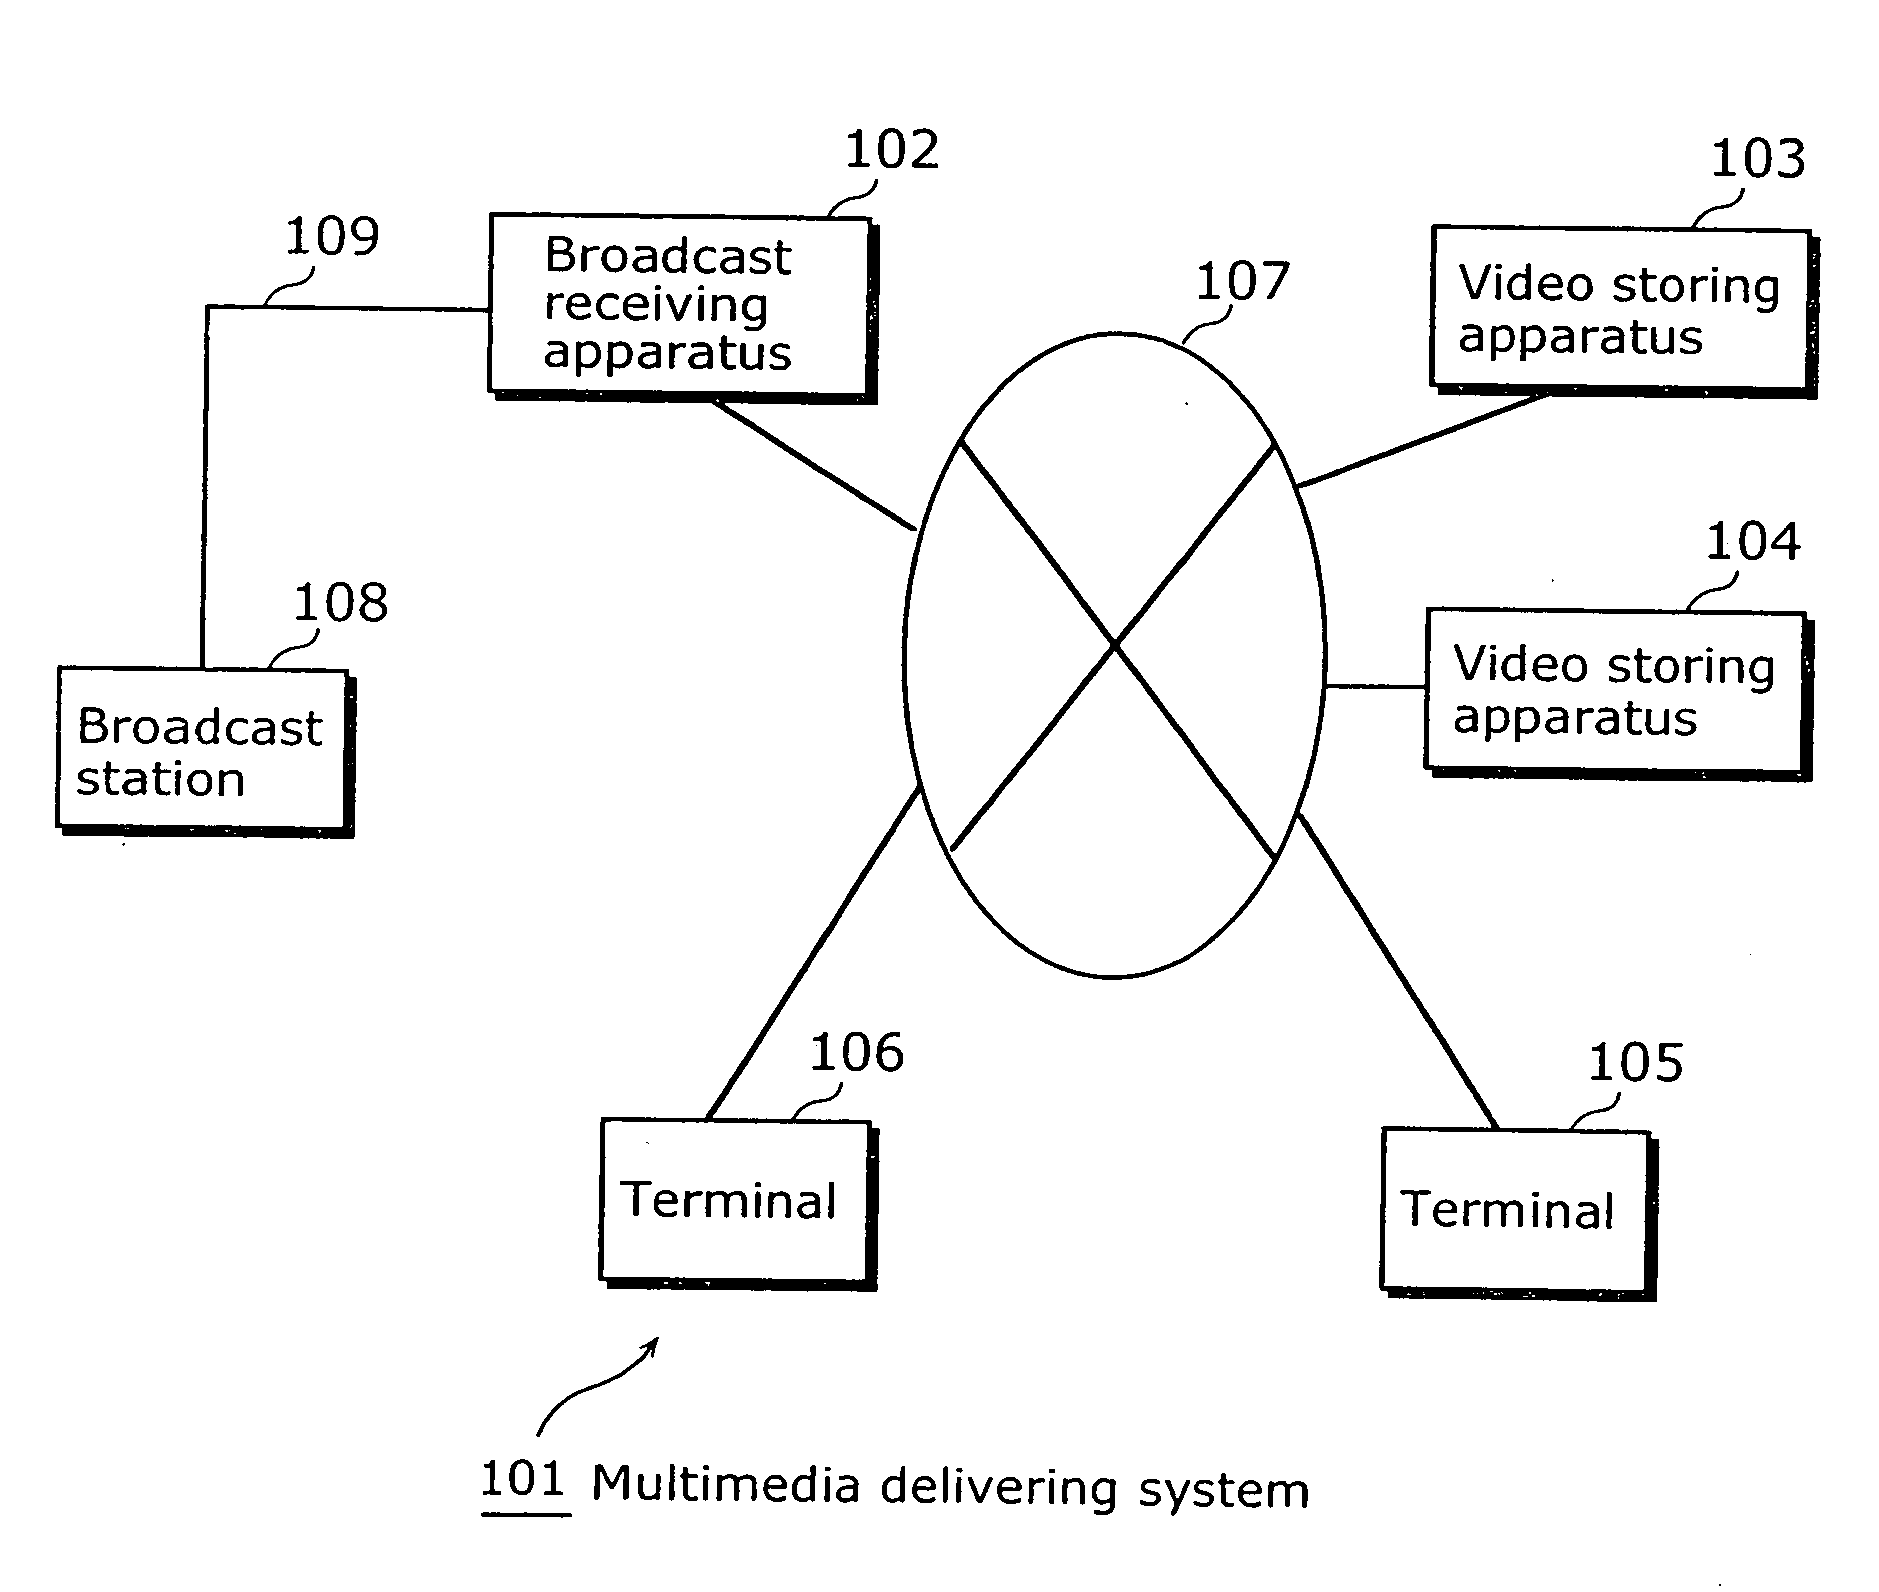 Broadcast receiving apparatus, video storing apparatus, and multimedia delivering system